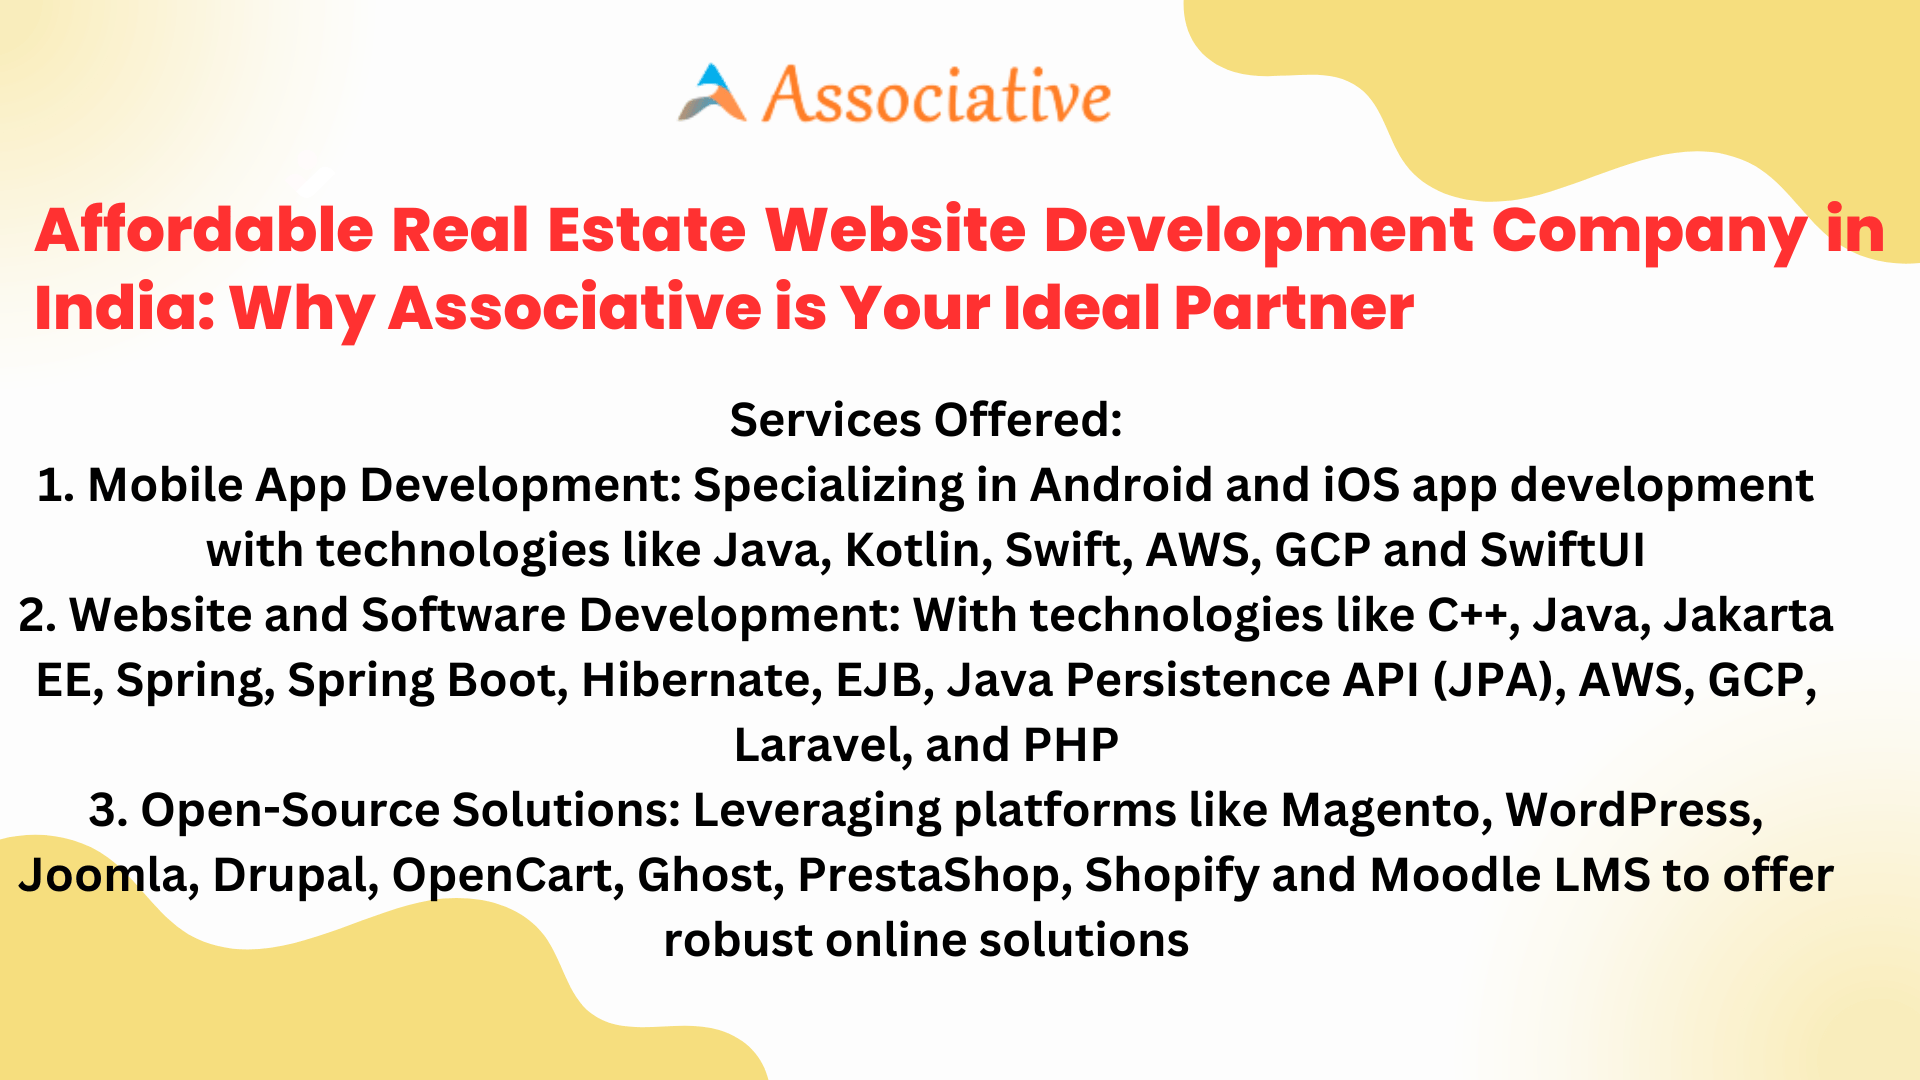 Affordable Real Estate Website Development Company in India: Why Associative is Your Ideal Partner